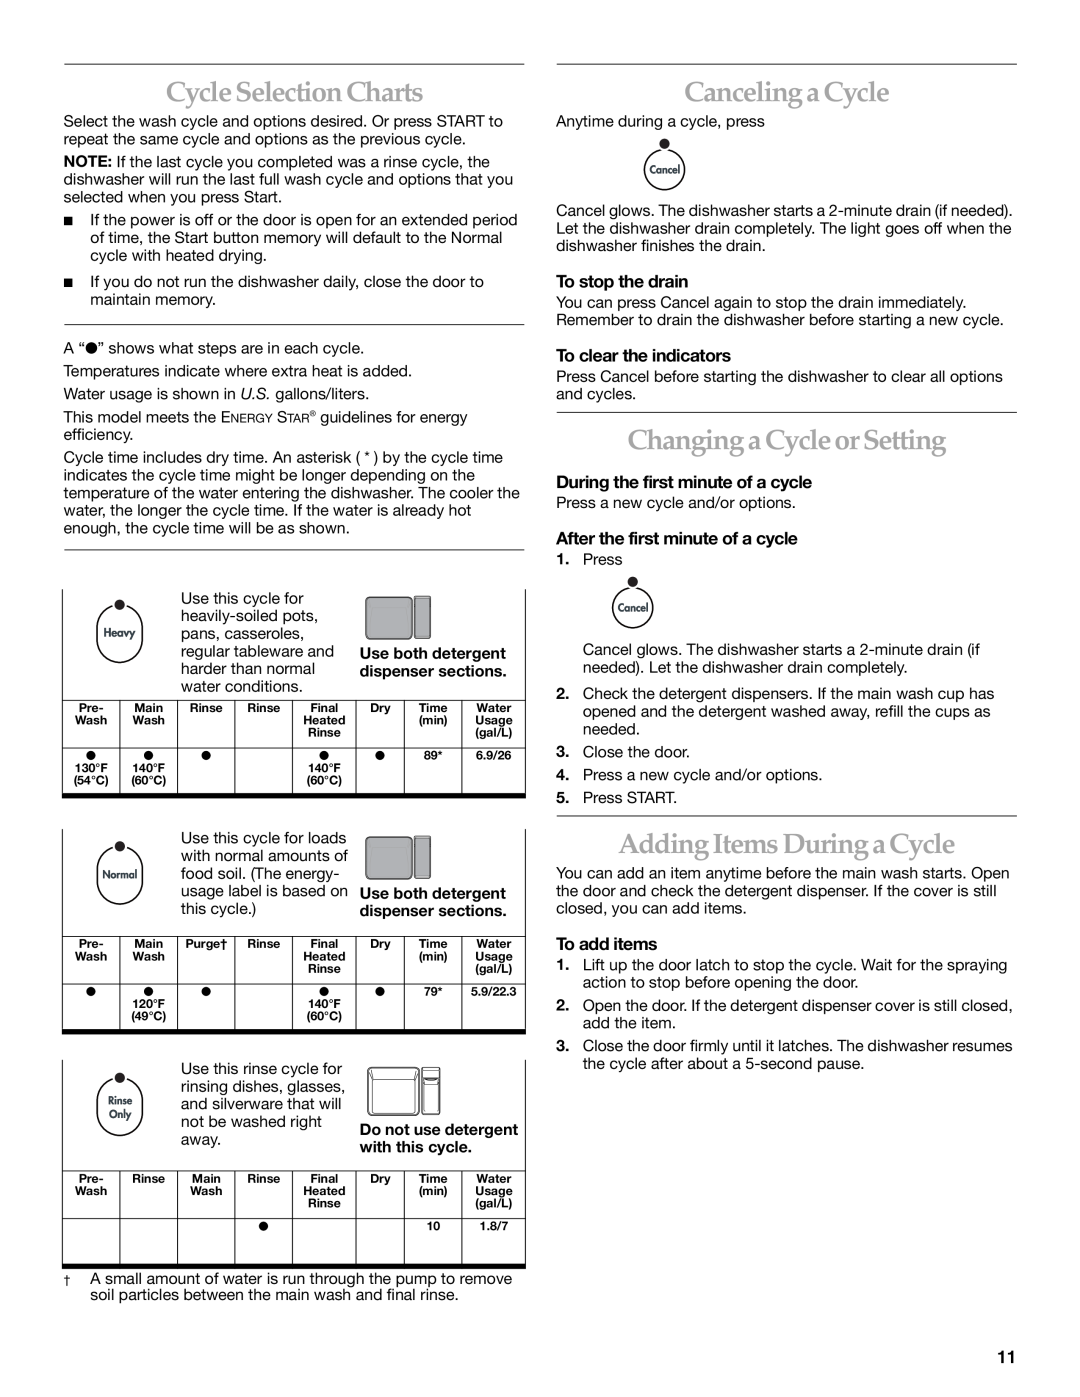 KitchenAid 119 manual Cycle Selection Charts, Canceling a Cycle, Changing a Cycle or Setting, Adding Items During a Cycle 